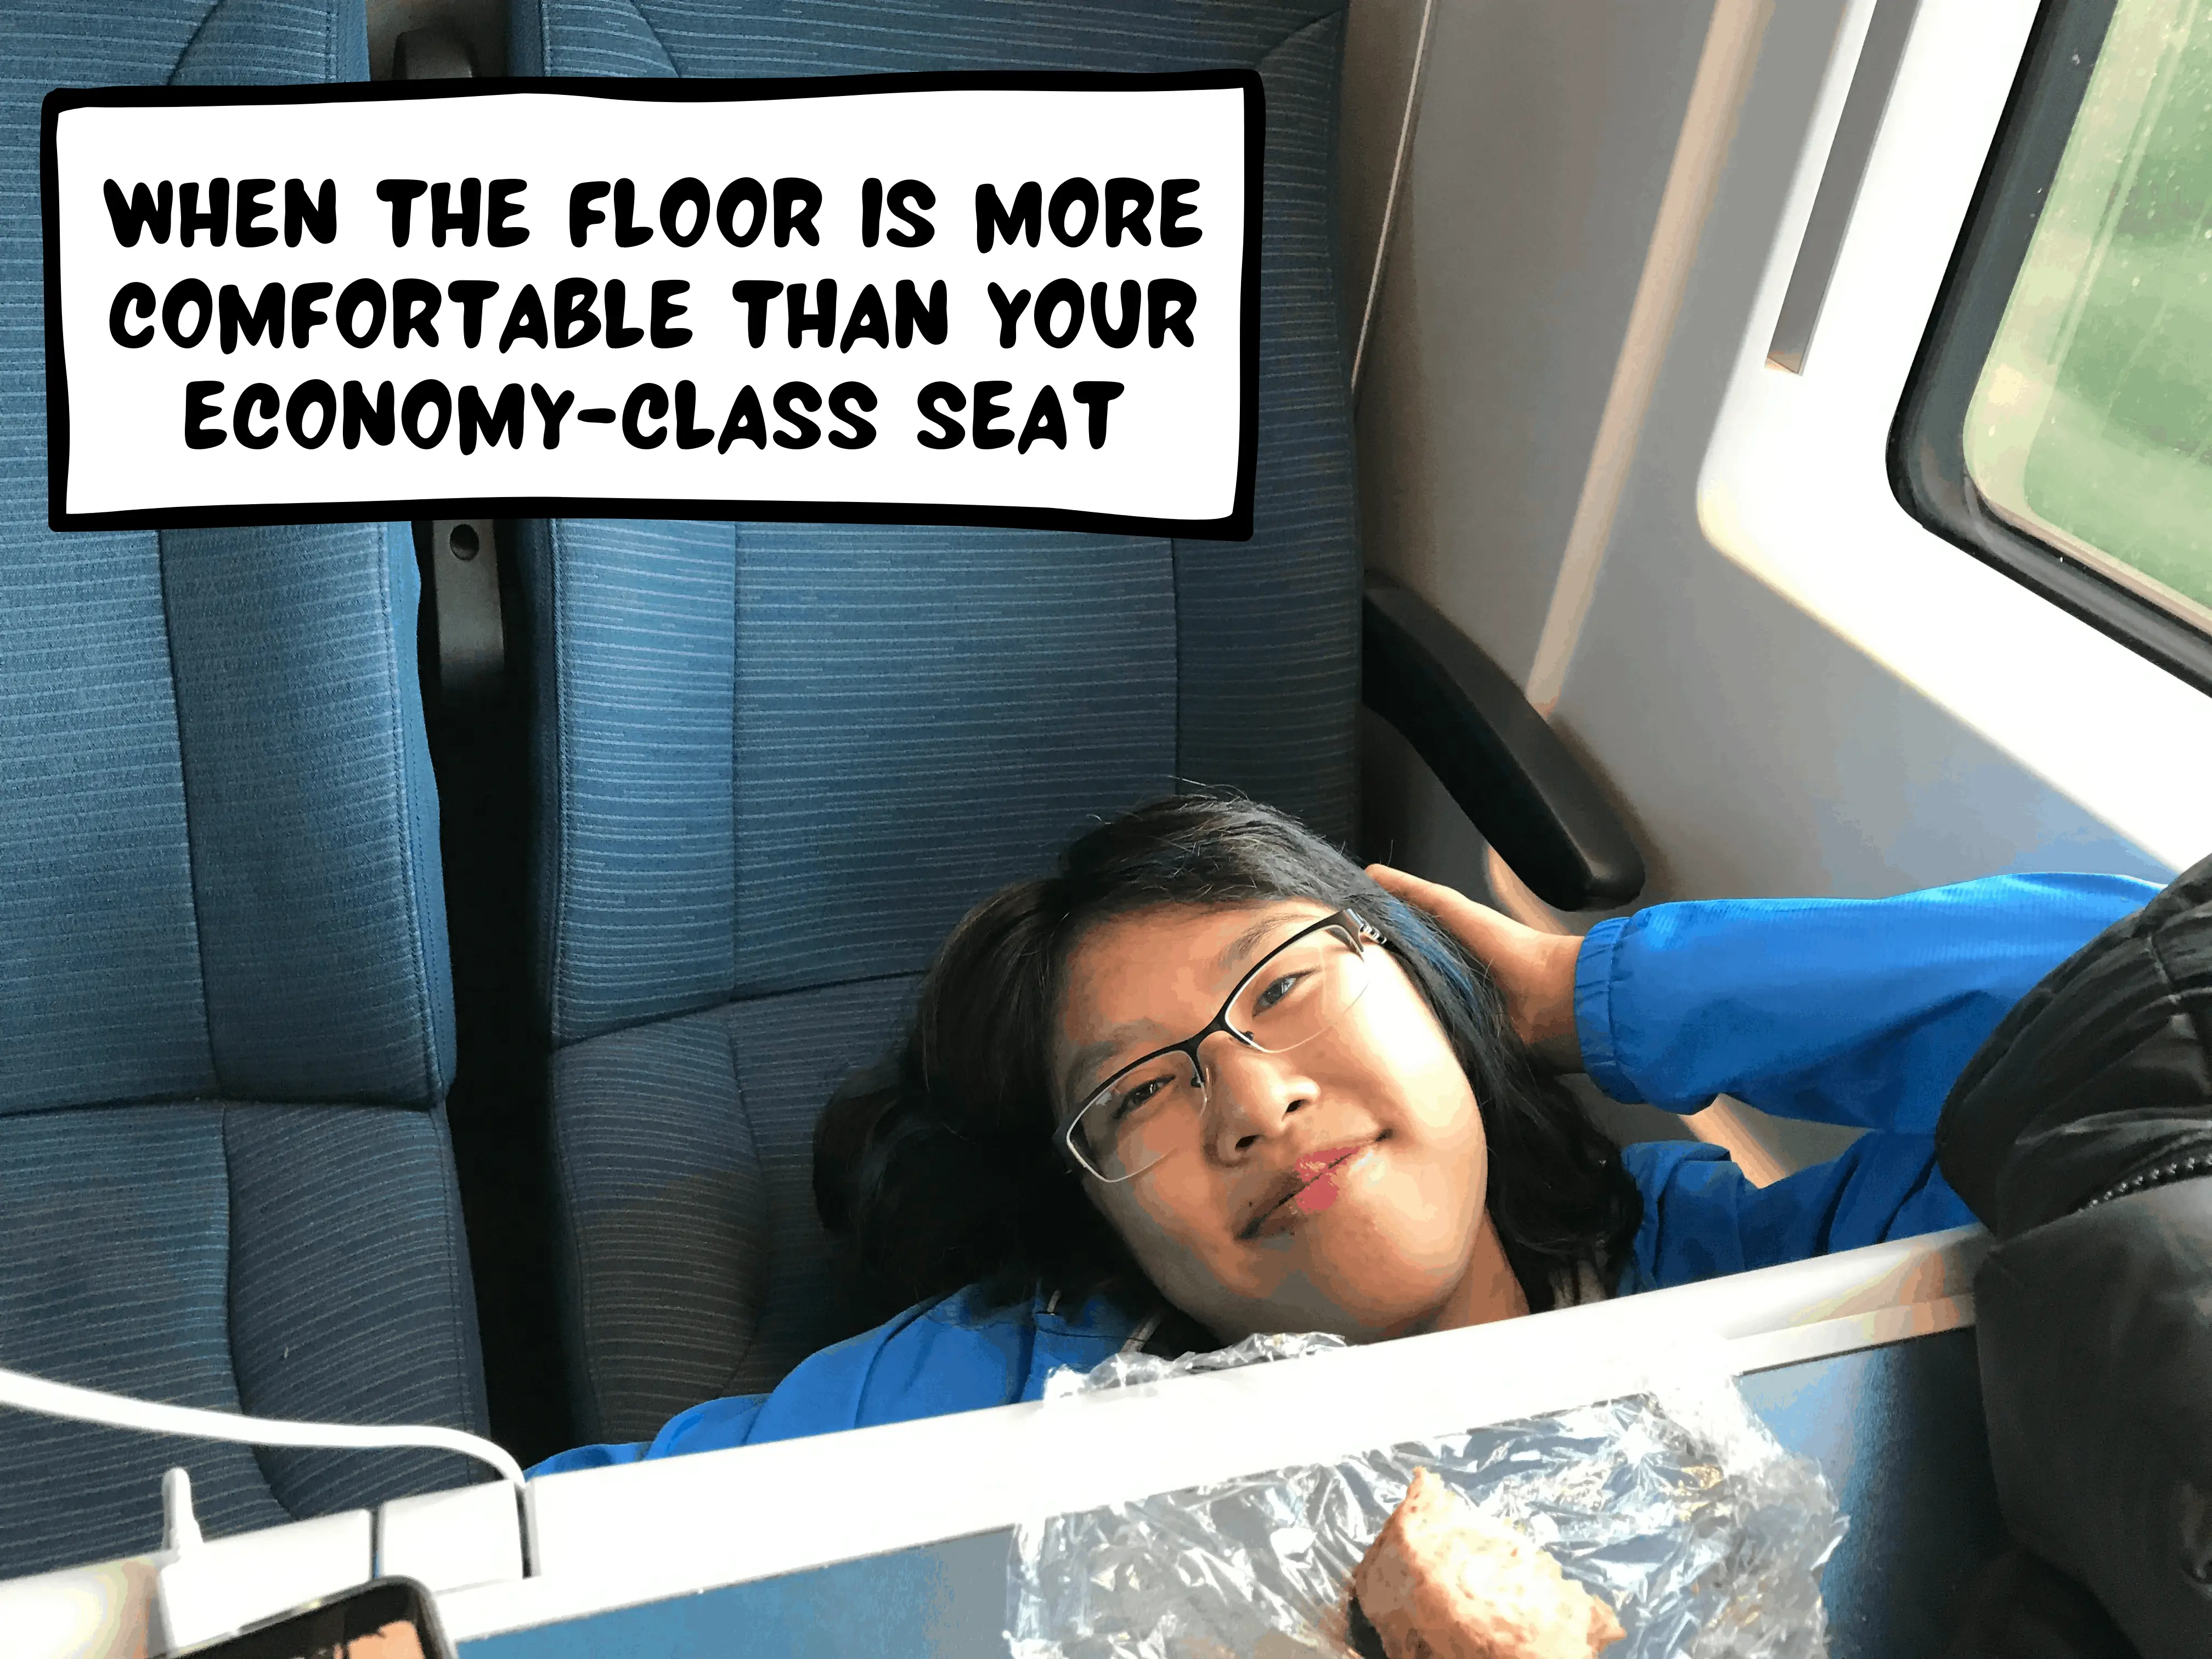 Meggie in her blue jacket is underneath the table in the Eurostar commuter train between Paris and London. She is smiling in a cheeky way. The comic text box says: "when the floor is more comfortable than your economy-class seat"